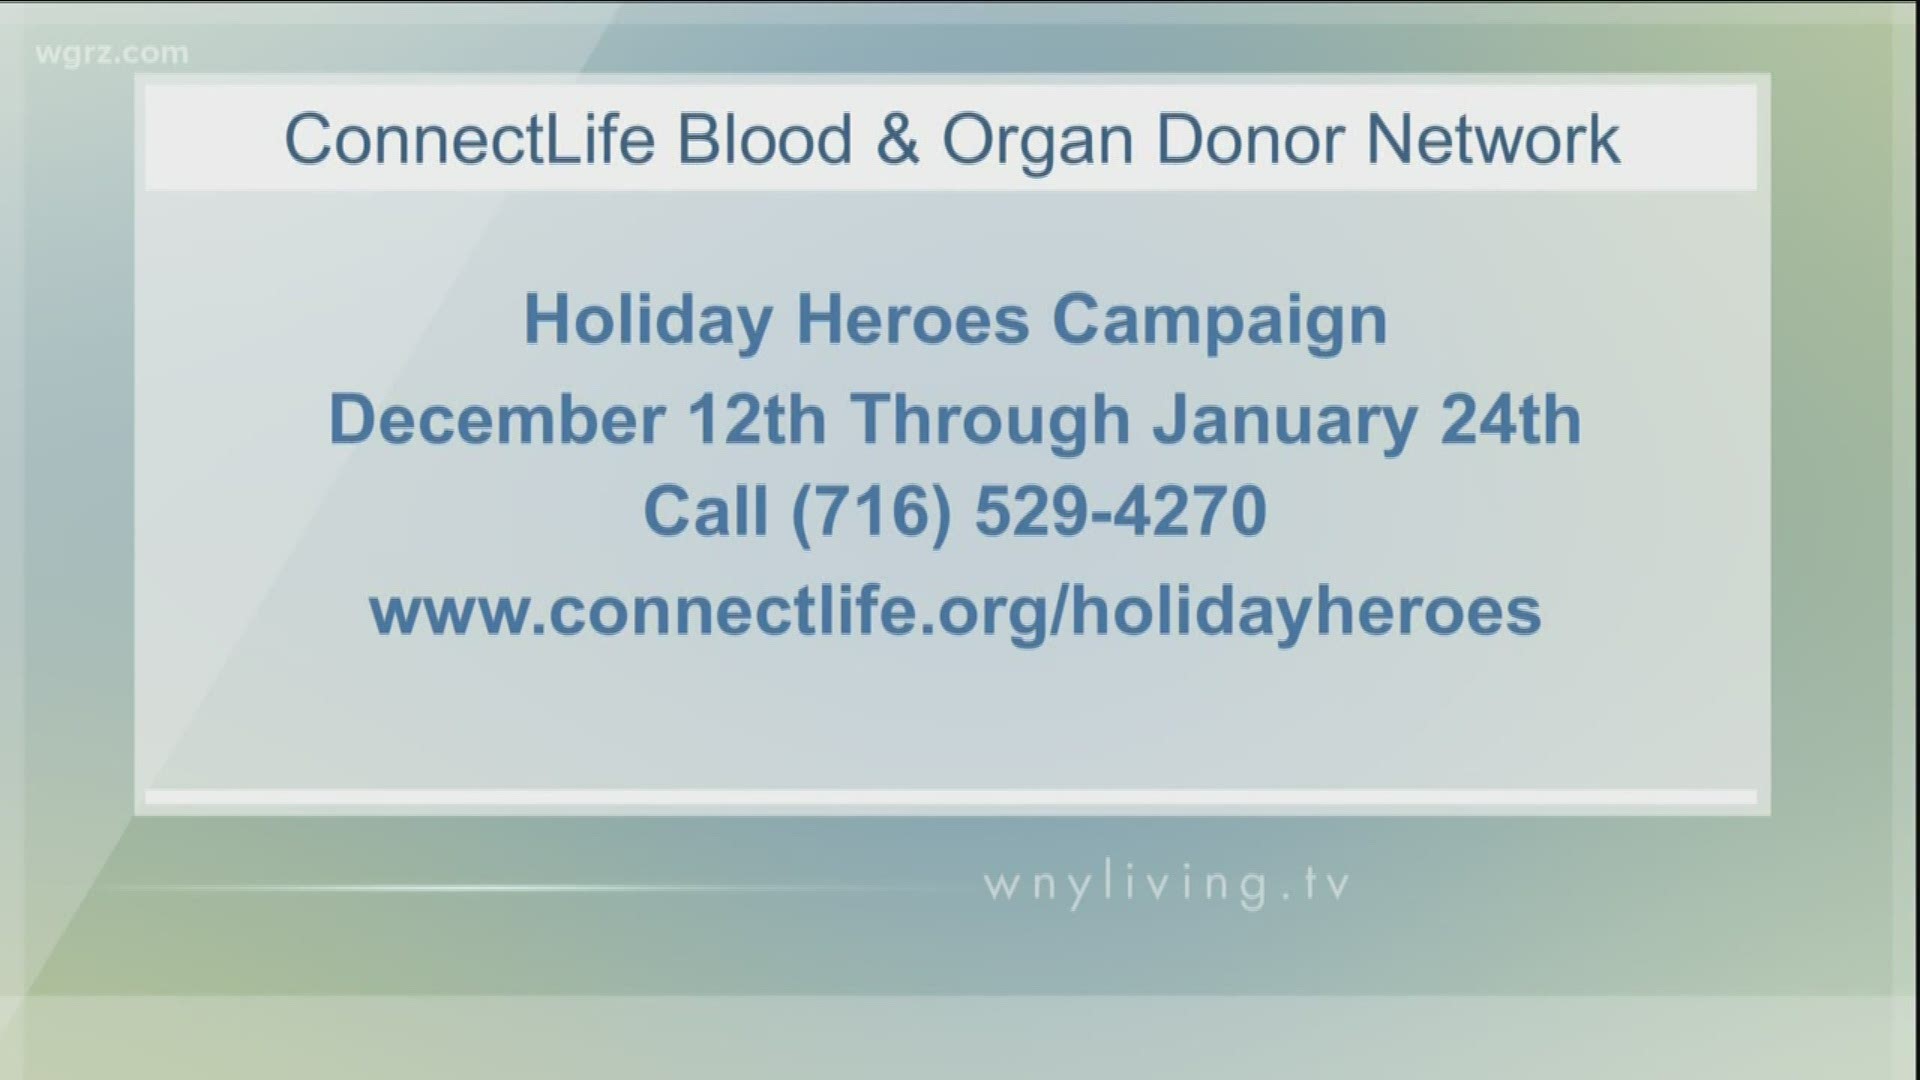 January 4 - ConnectLife Holiday Heroes Campaign (THIS VIDEO IS SPONSORED BY CONNECTLIFE HOLIDAY HEROES CAMPAIGN)